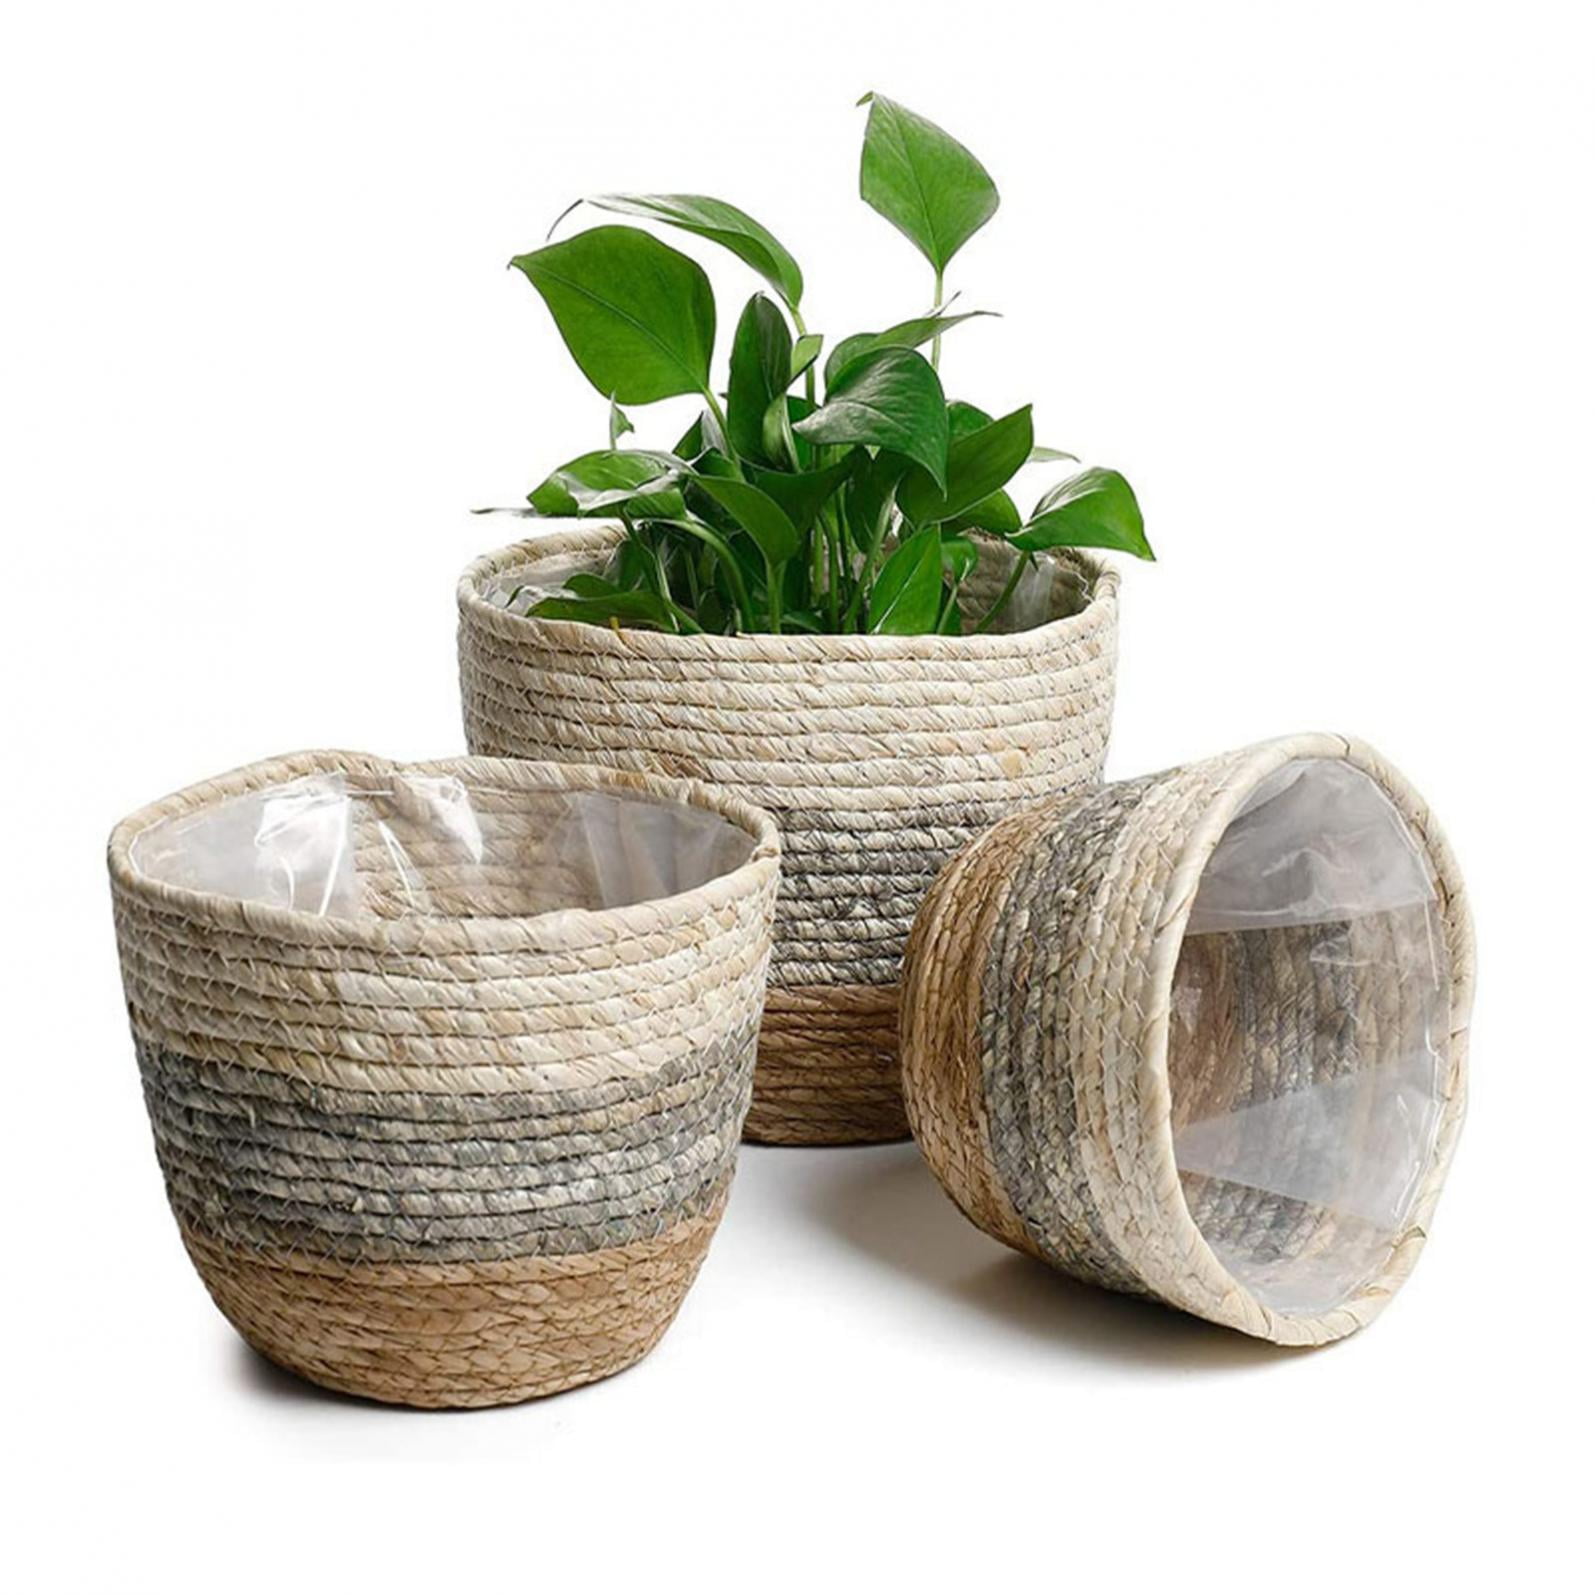 Juvale Seagrass Indoor Planter Set with Plastic Lining, 3 Small Woven  Wicker Baskets for Plants, Flower (3 Sizes)